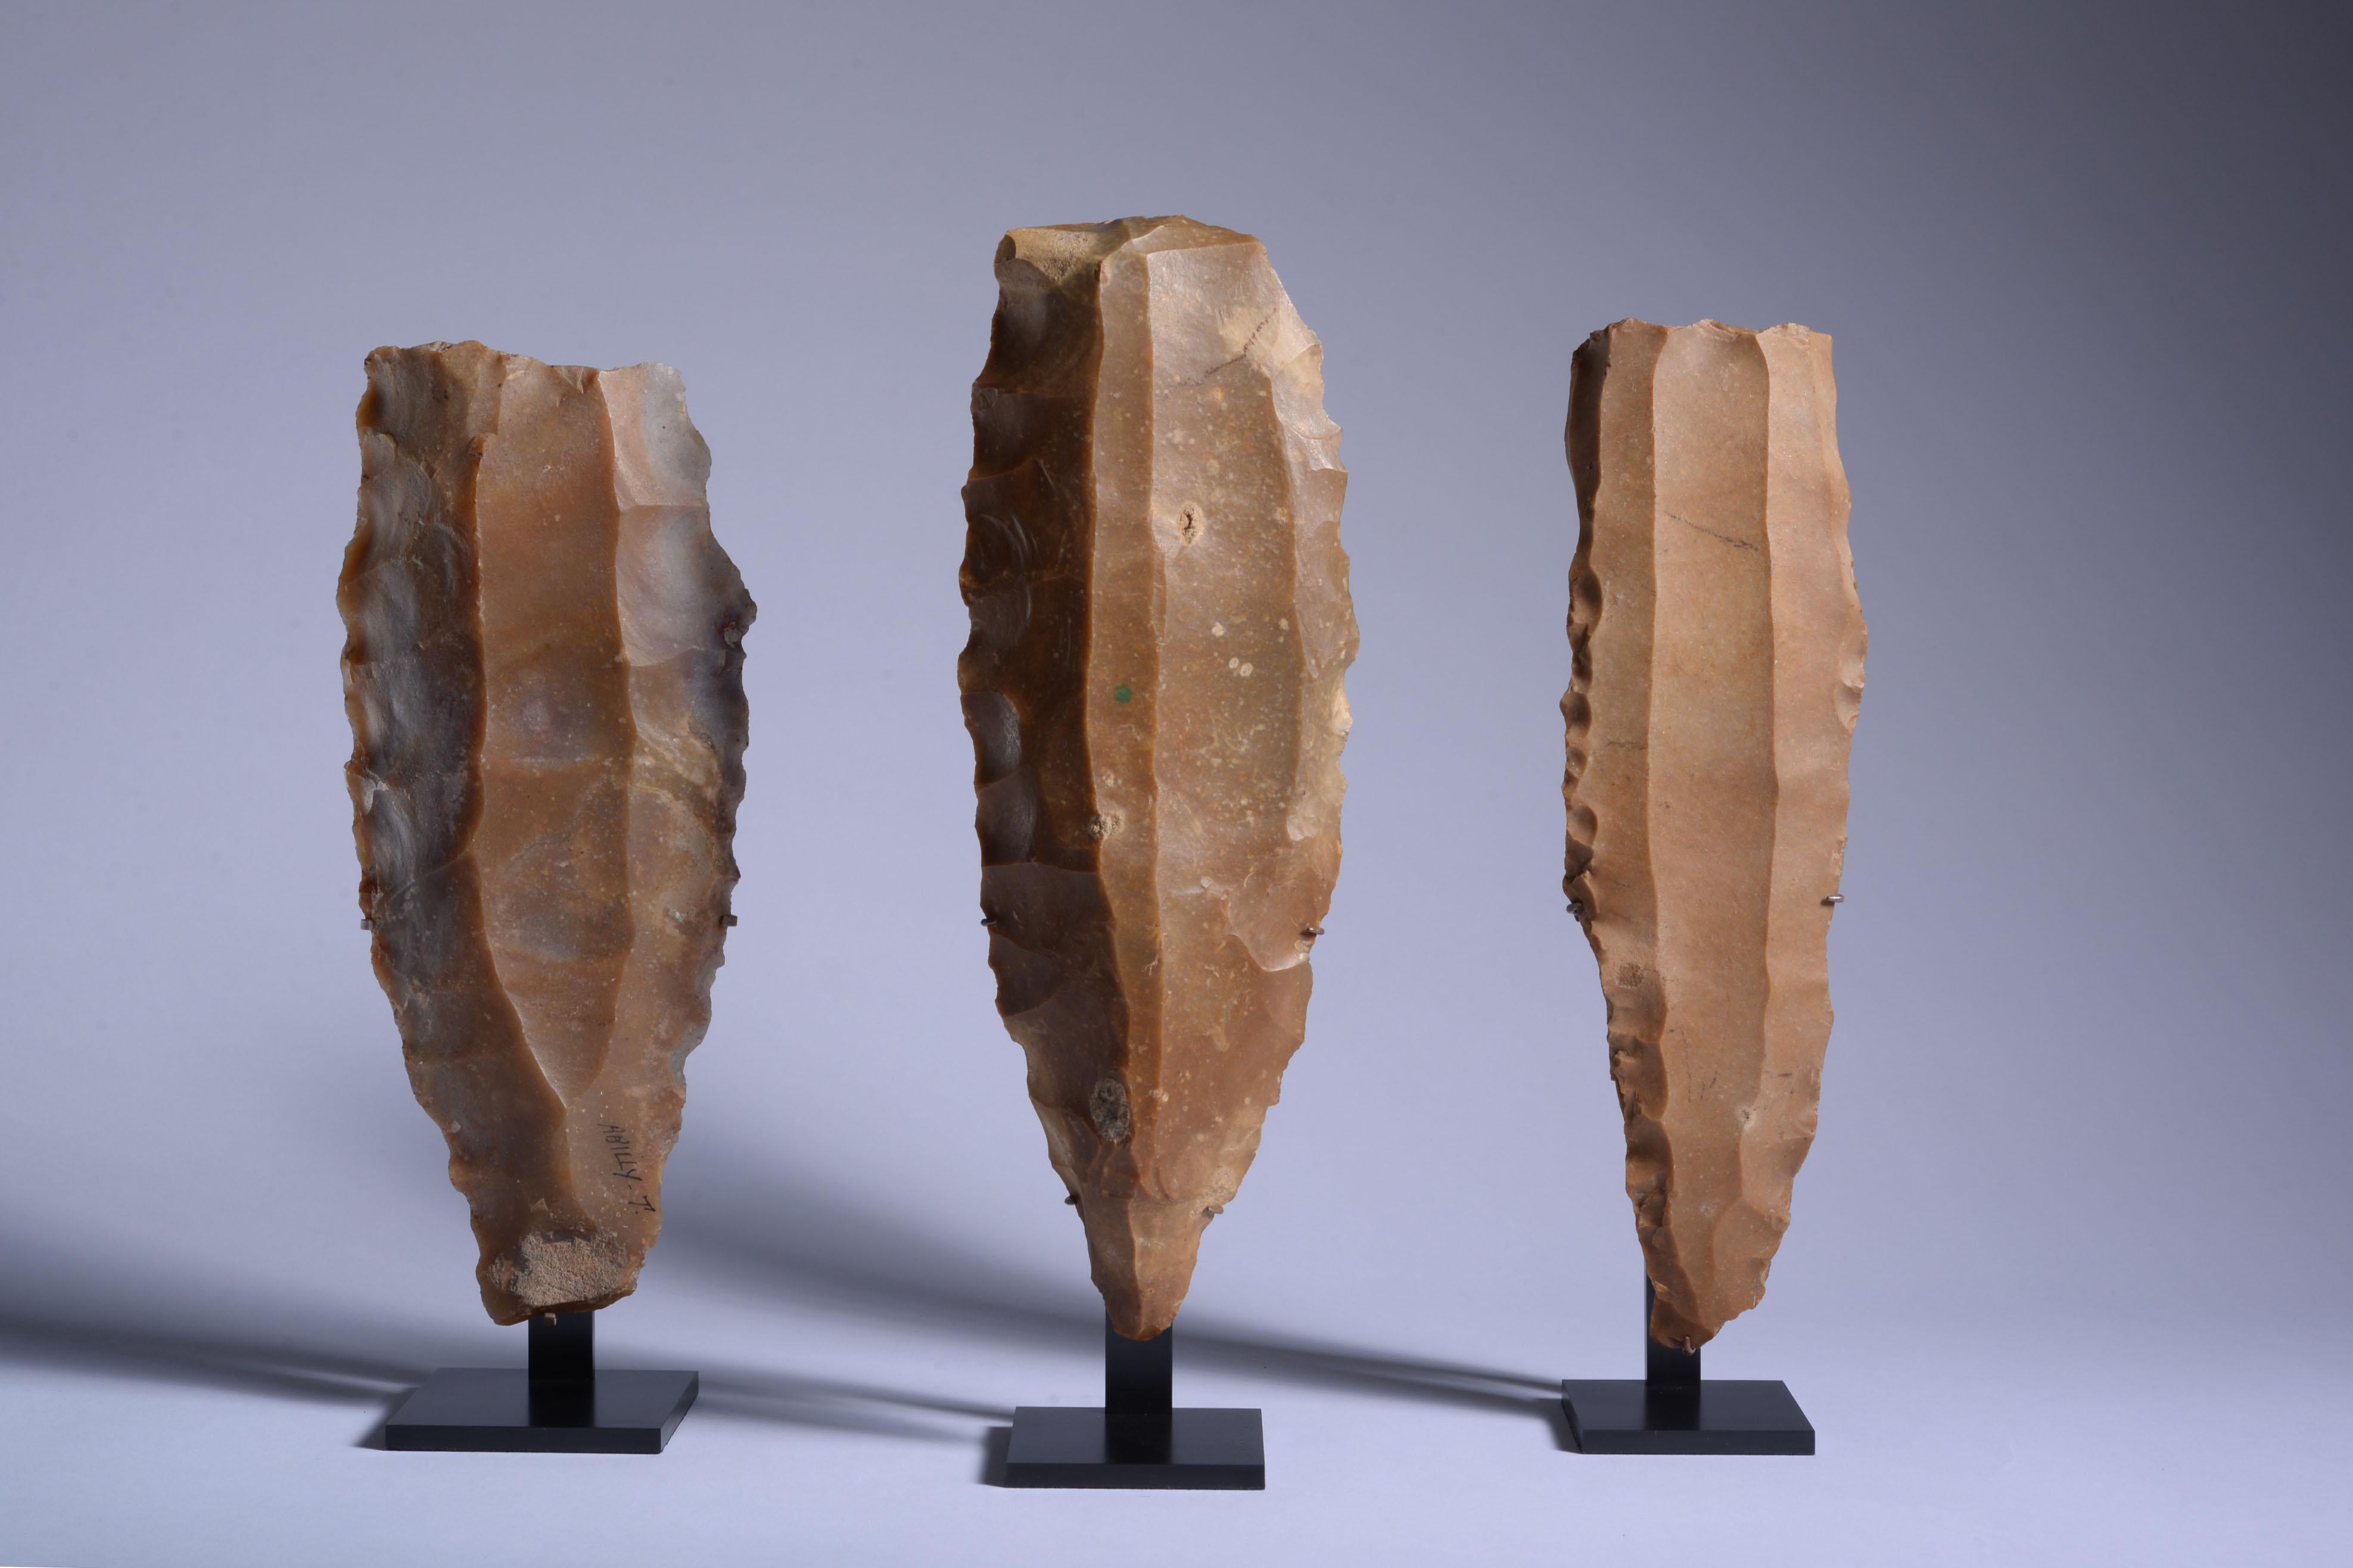 Three Flint cores or 'Livres de Beurre'
Late Neolithic, 3rd millennium B.C.
Flint

With their rugged forms and deep golden-caramel exteriors, these exceptional ‘livres de beurre’ (‘pounds of butter’) represent remarkable artefacts from Late